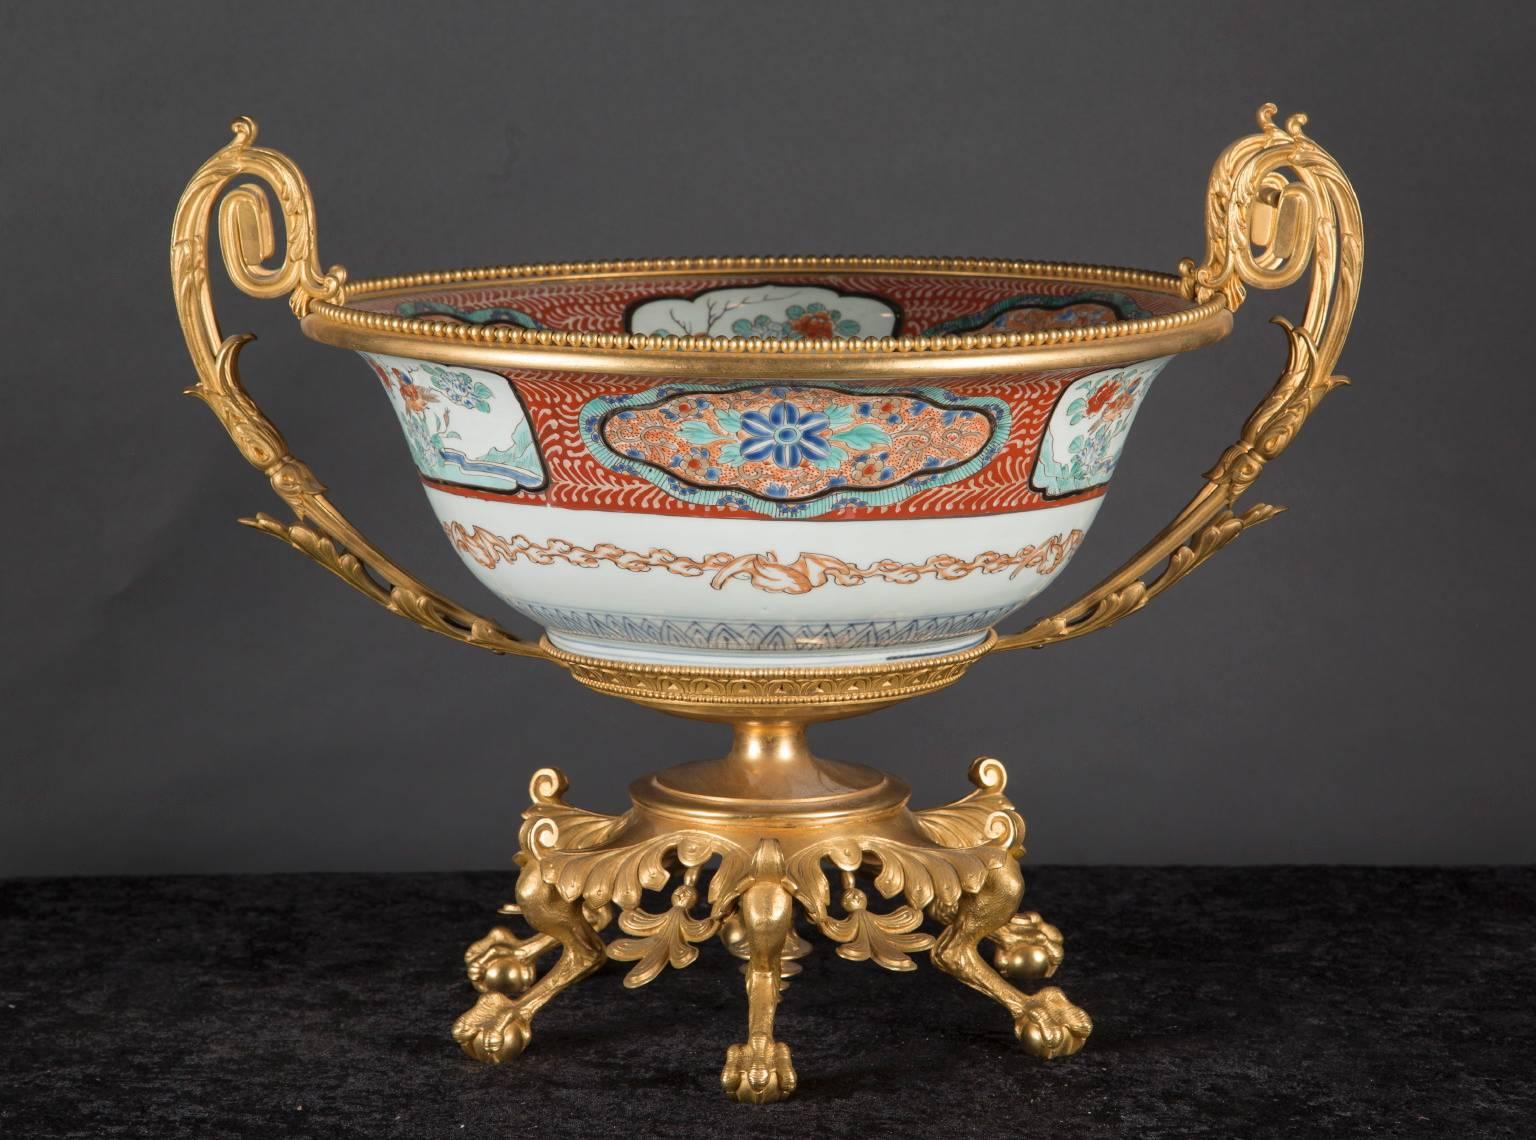 This large Japanese porcelain centerpiece combines 18th century porcelain with 19th century French bronze d’ore. This combination was classic to the period as the French would import the high quality porcelain and later add their own intricate gold